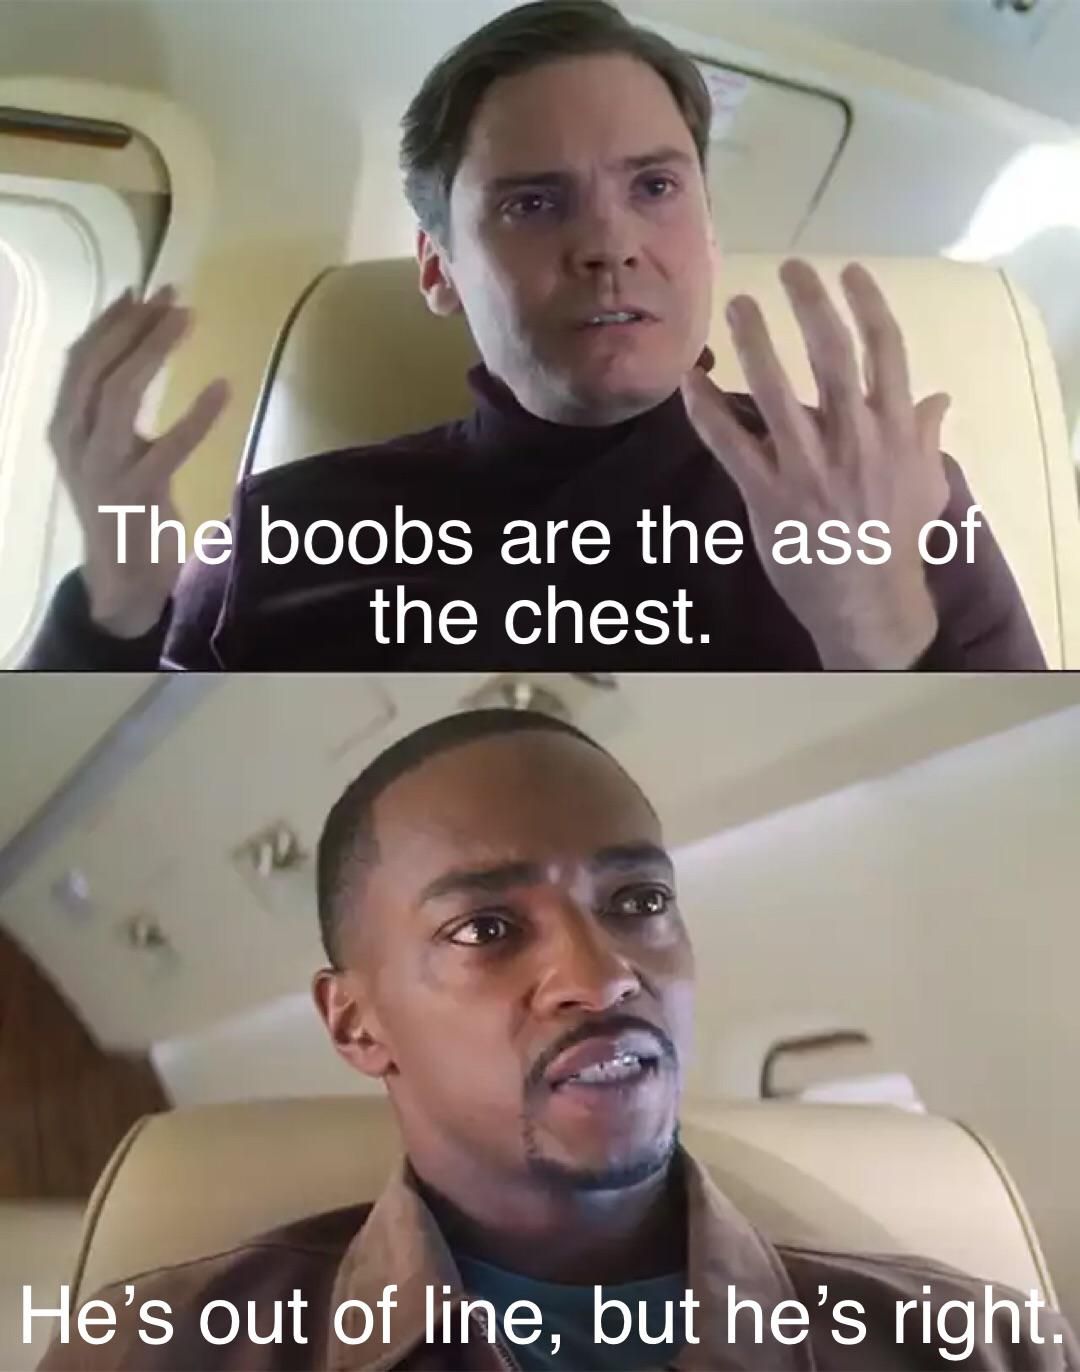 you know i’m something of a boob guy myself